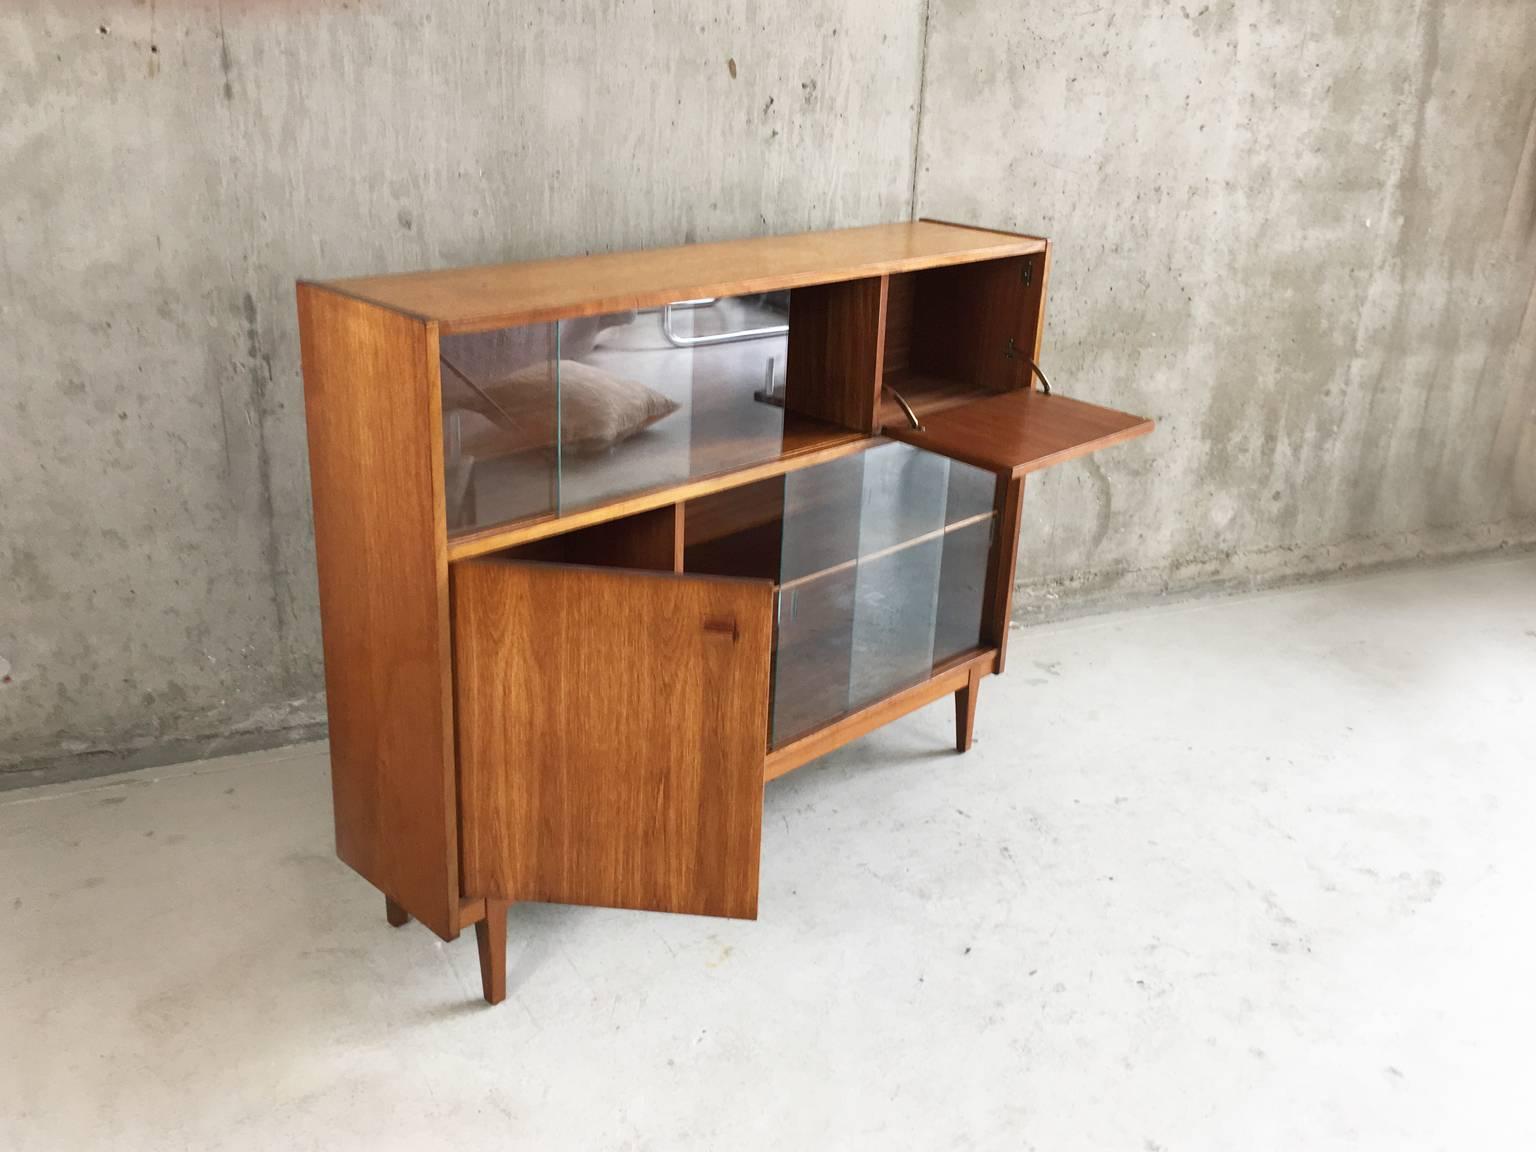 A lovely piece from English maker Nathan. Cool, restrained and well made with a mix of cupboards and bookshelves with glass doors.